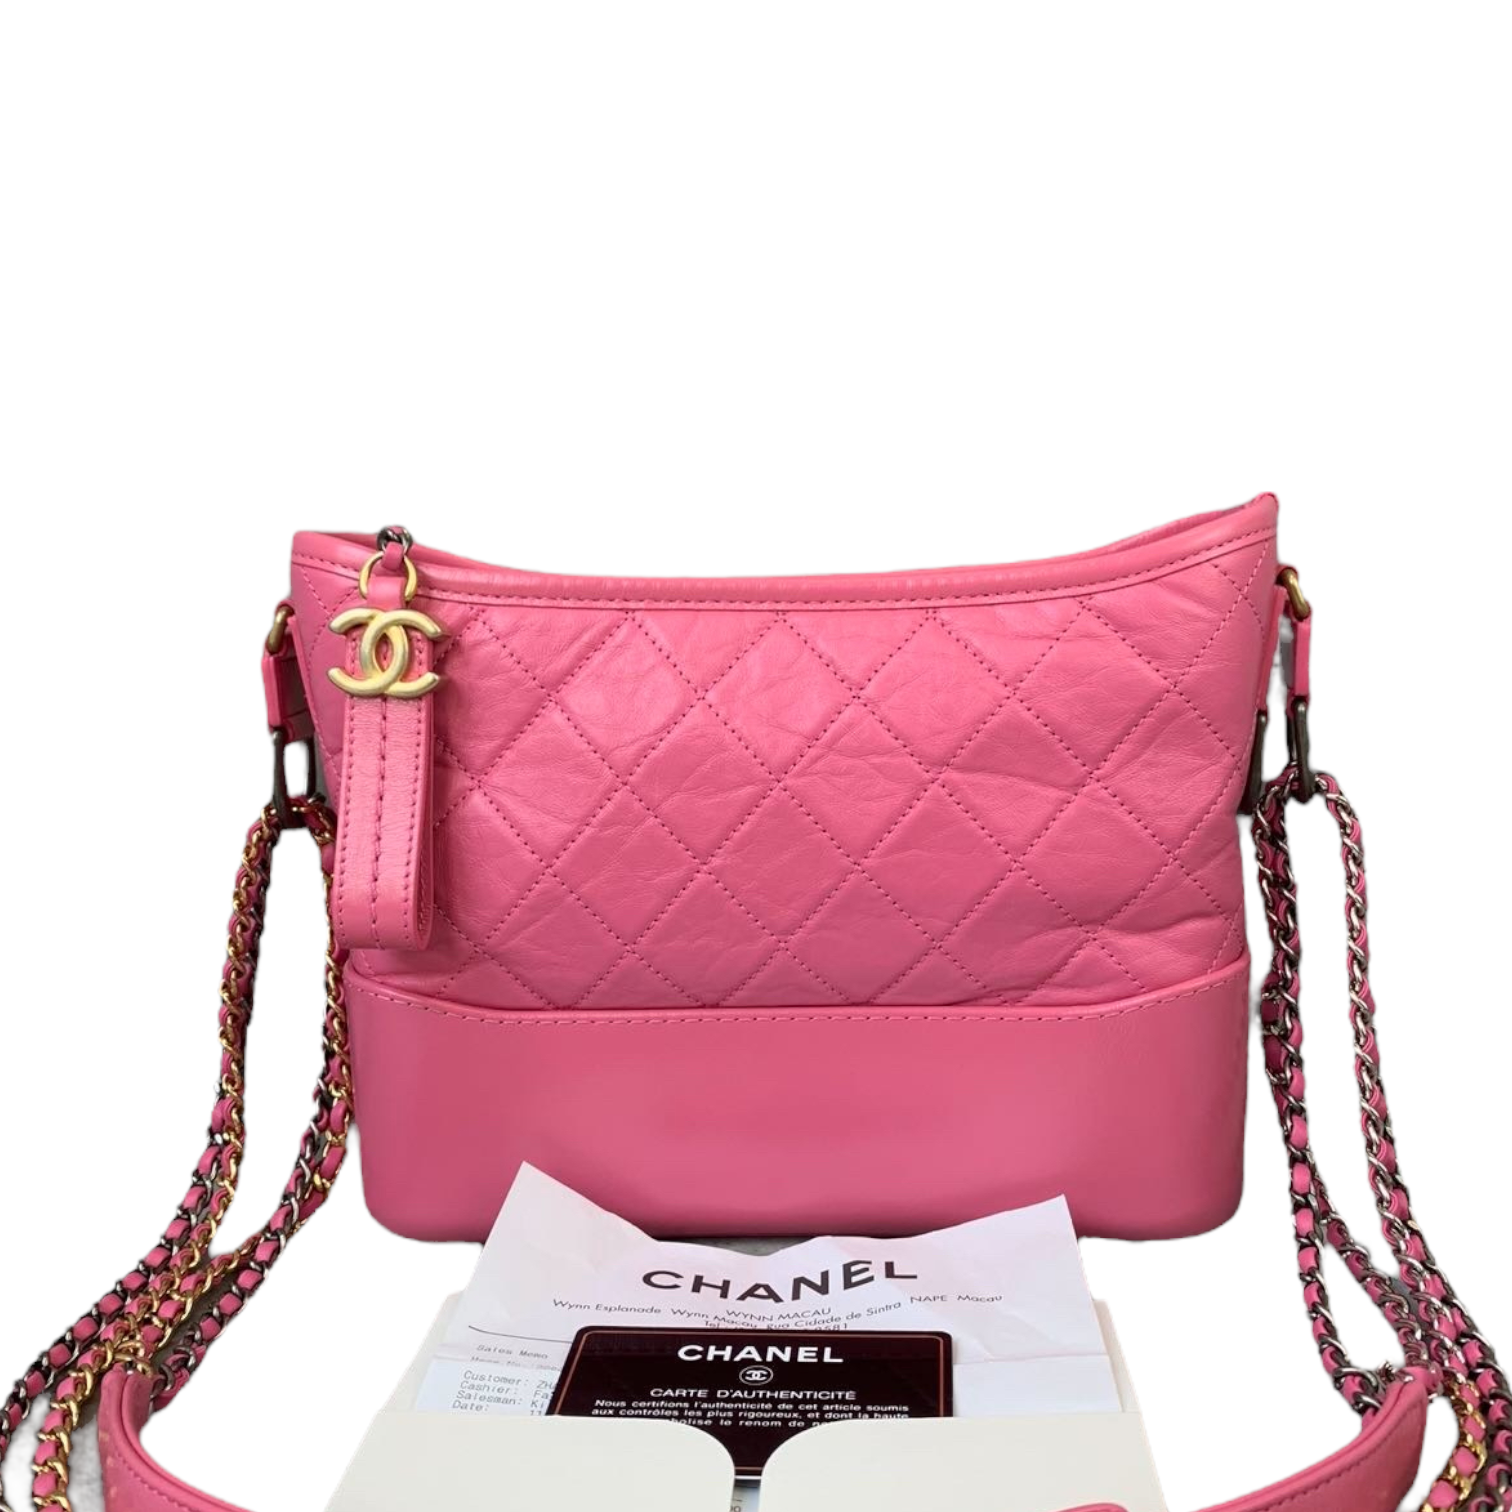 Chanel Gabrielle Hobo Quilted Tweed and Calfskin Medium Pink